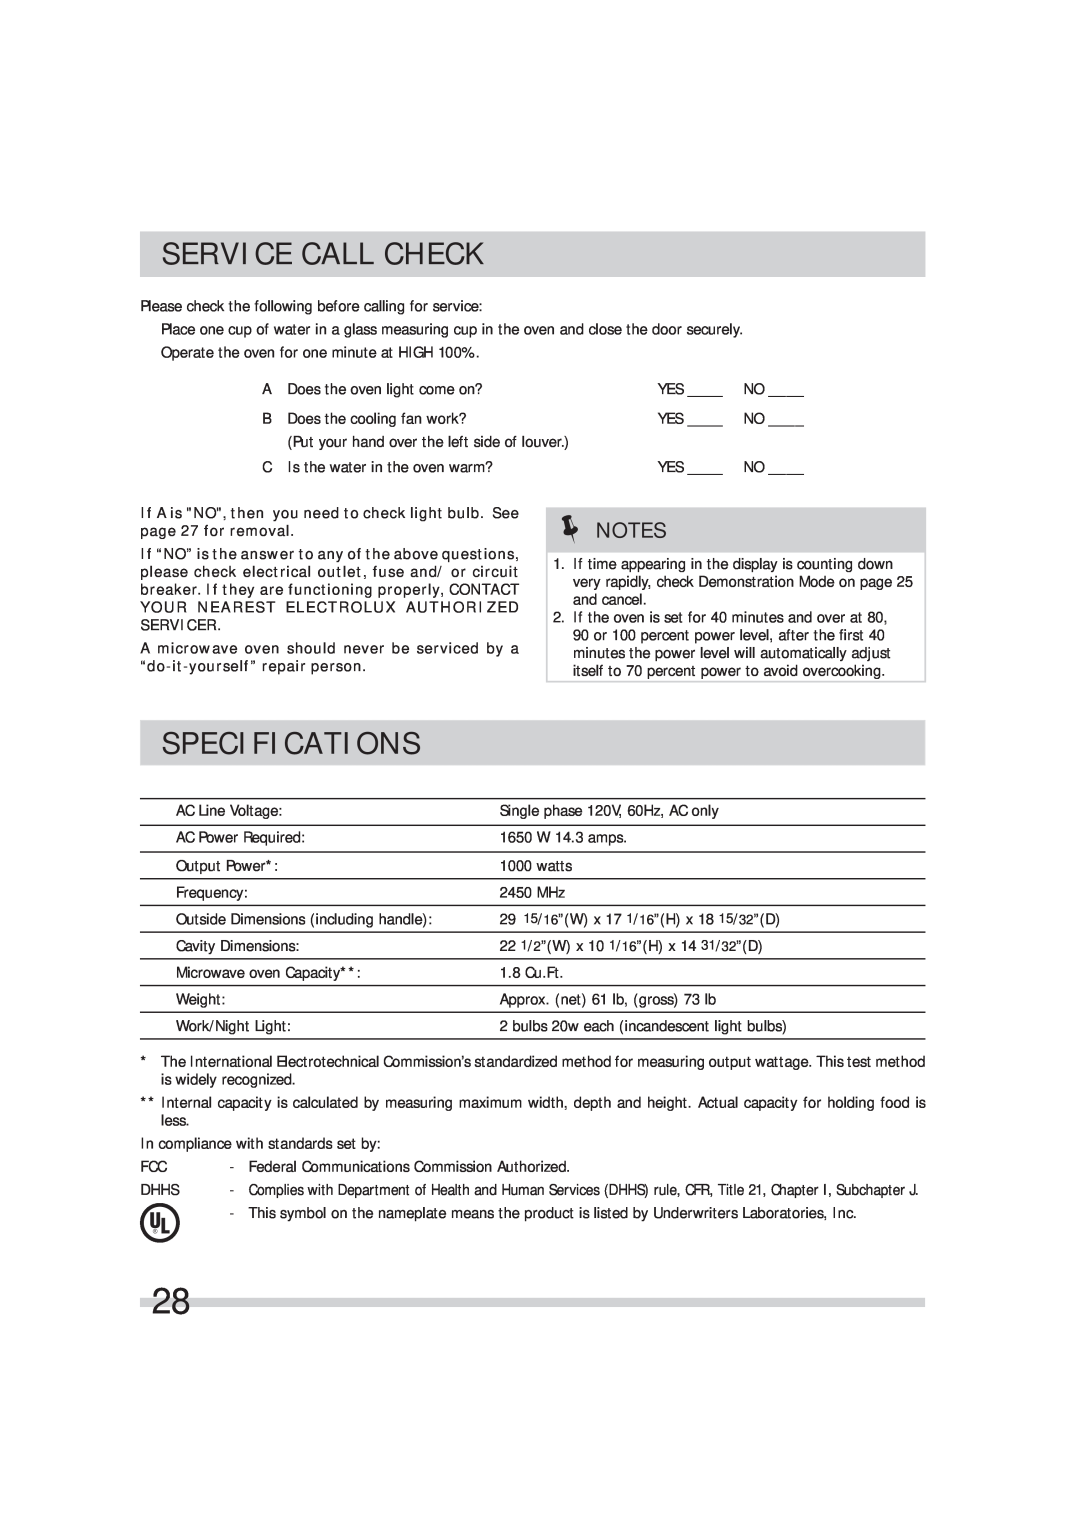 Frigidaire 316495054 manual Service Call Check, Specifications 